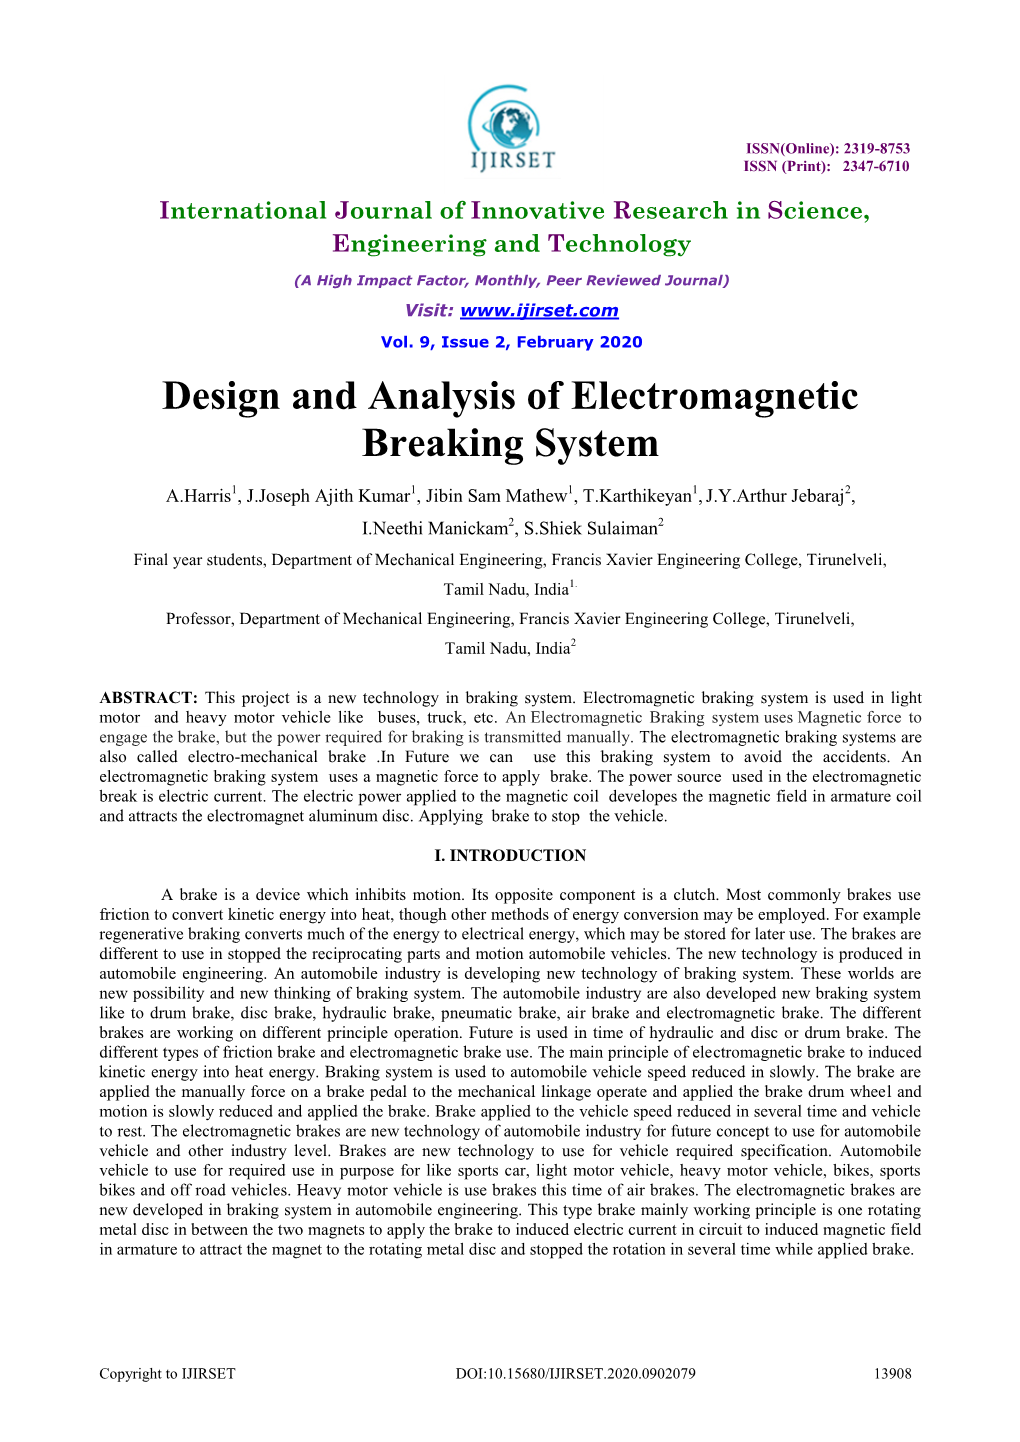 Design and Analysis of Electromagnetic Breaking System